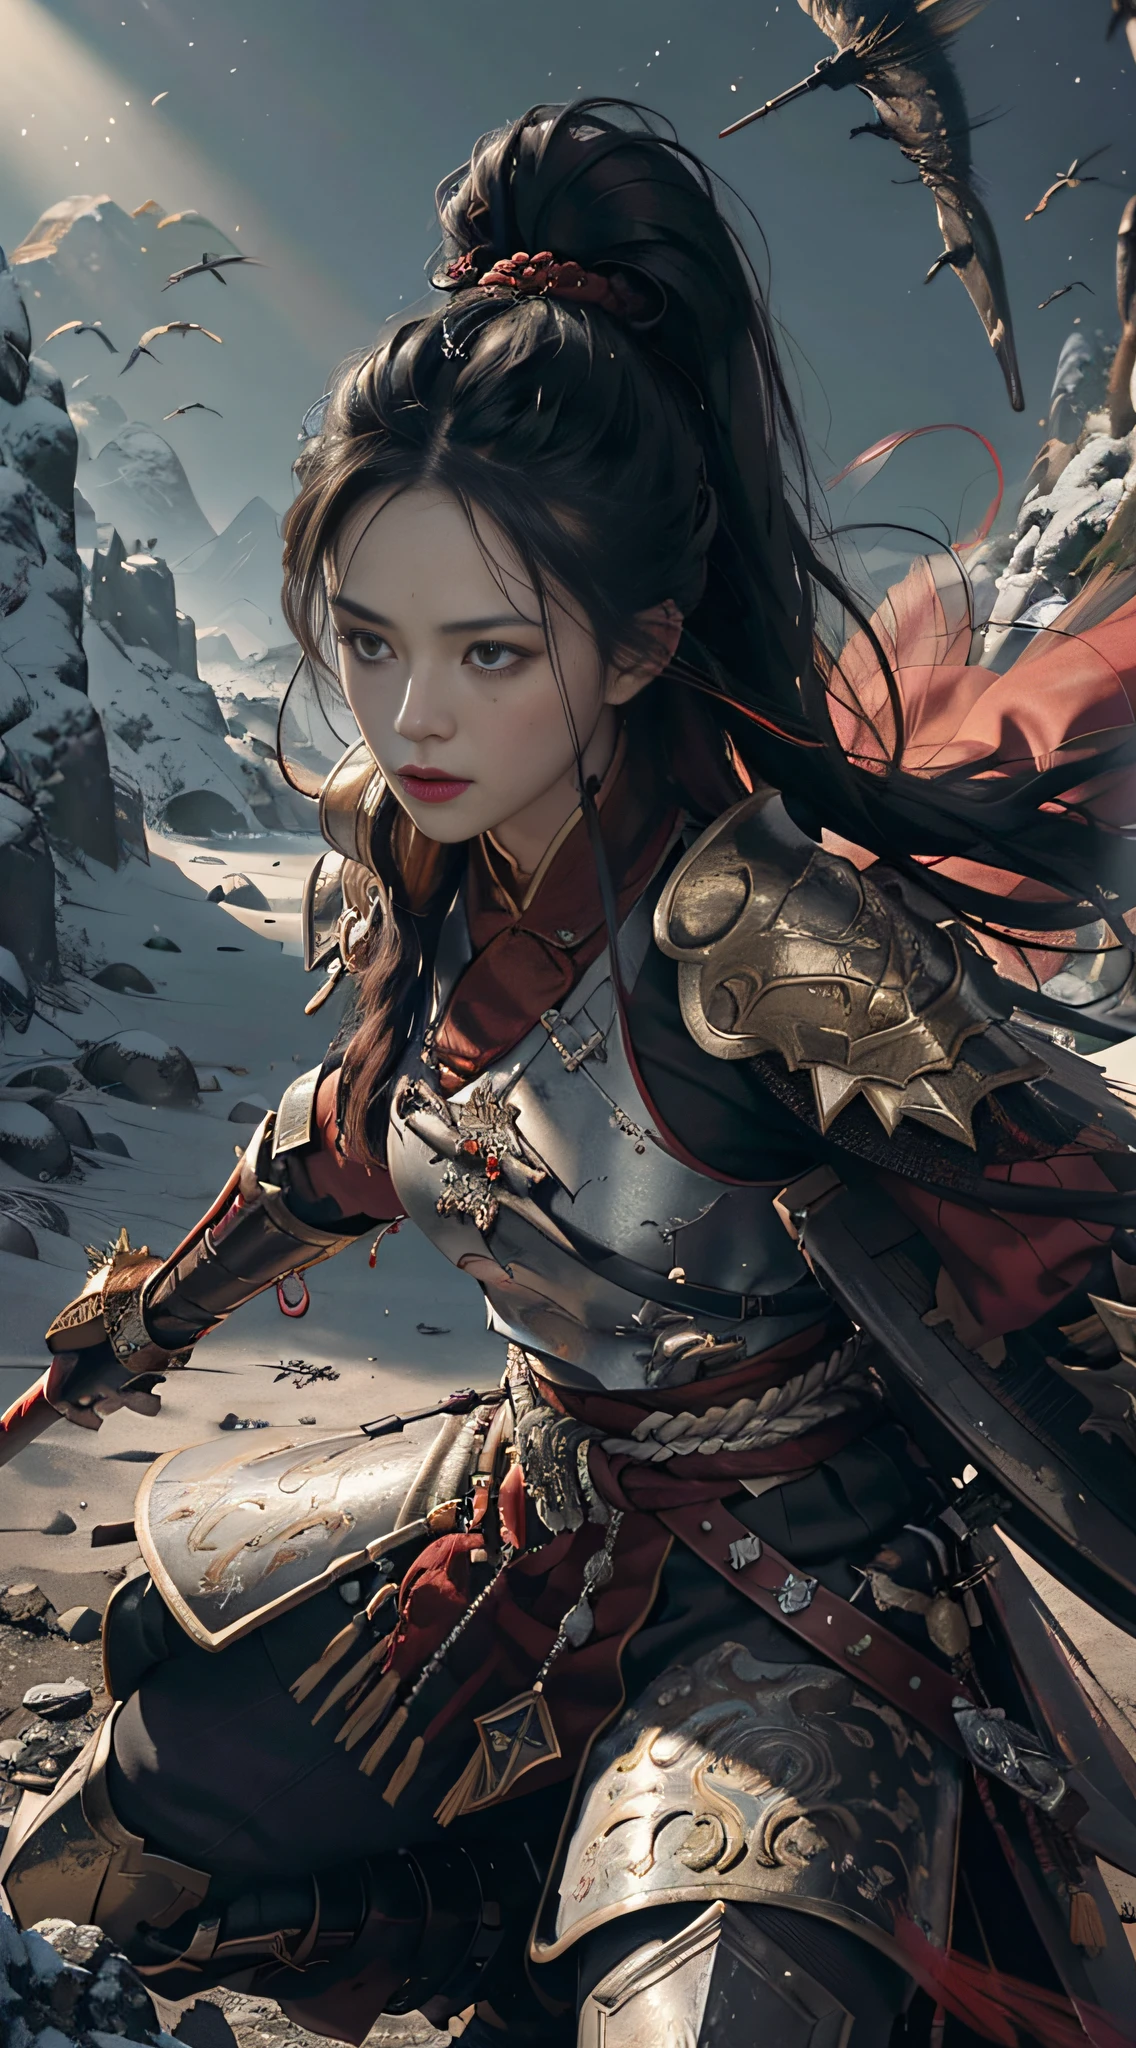 (Positive Focus), (In the Dark: 1), (Best Quality), Movie Poster, Highly Detailed, 8k Wallpaper, Volume Lighting, Dynamic Lighting, A Girl, Long Black Hair, Ponytail, Black Metal Armor, Red Belt, Black Armor, Shoulder Armor, Waist Guard, Hand Guard, Veil, Holding a Long Sword in front of Body, Ancient Chinese Style, Battle Stance, Lots of Blood, Blood Stains on Face, Clothes Damaged, Ancient Chinese Battlefield, Ancient Chinese Soldiers, Arrows Flying, War, Night, Dramatic Composition, Sword qi surrounding, rich picture detail, war, movie lighting,